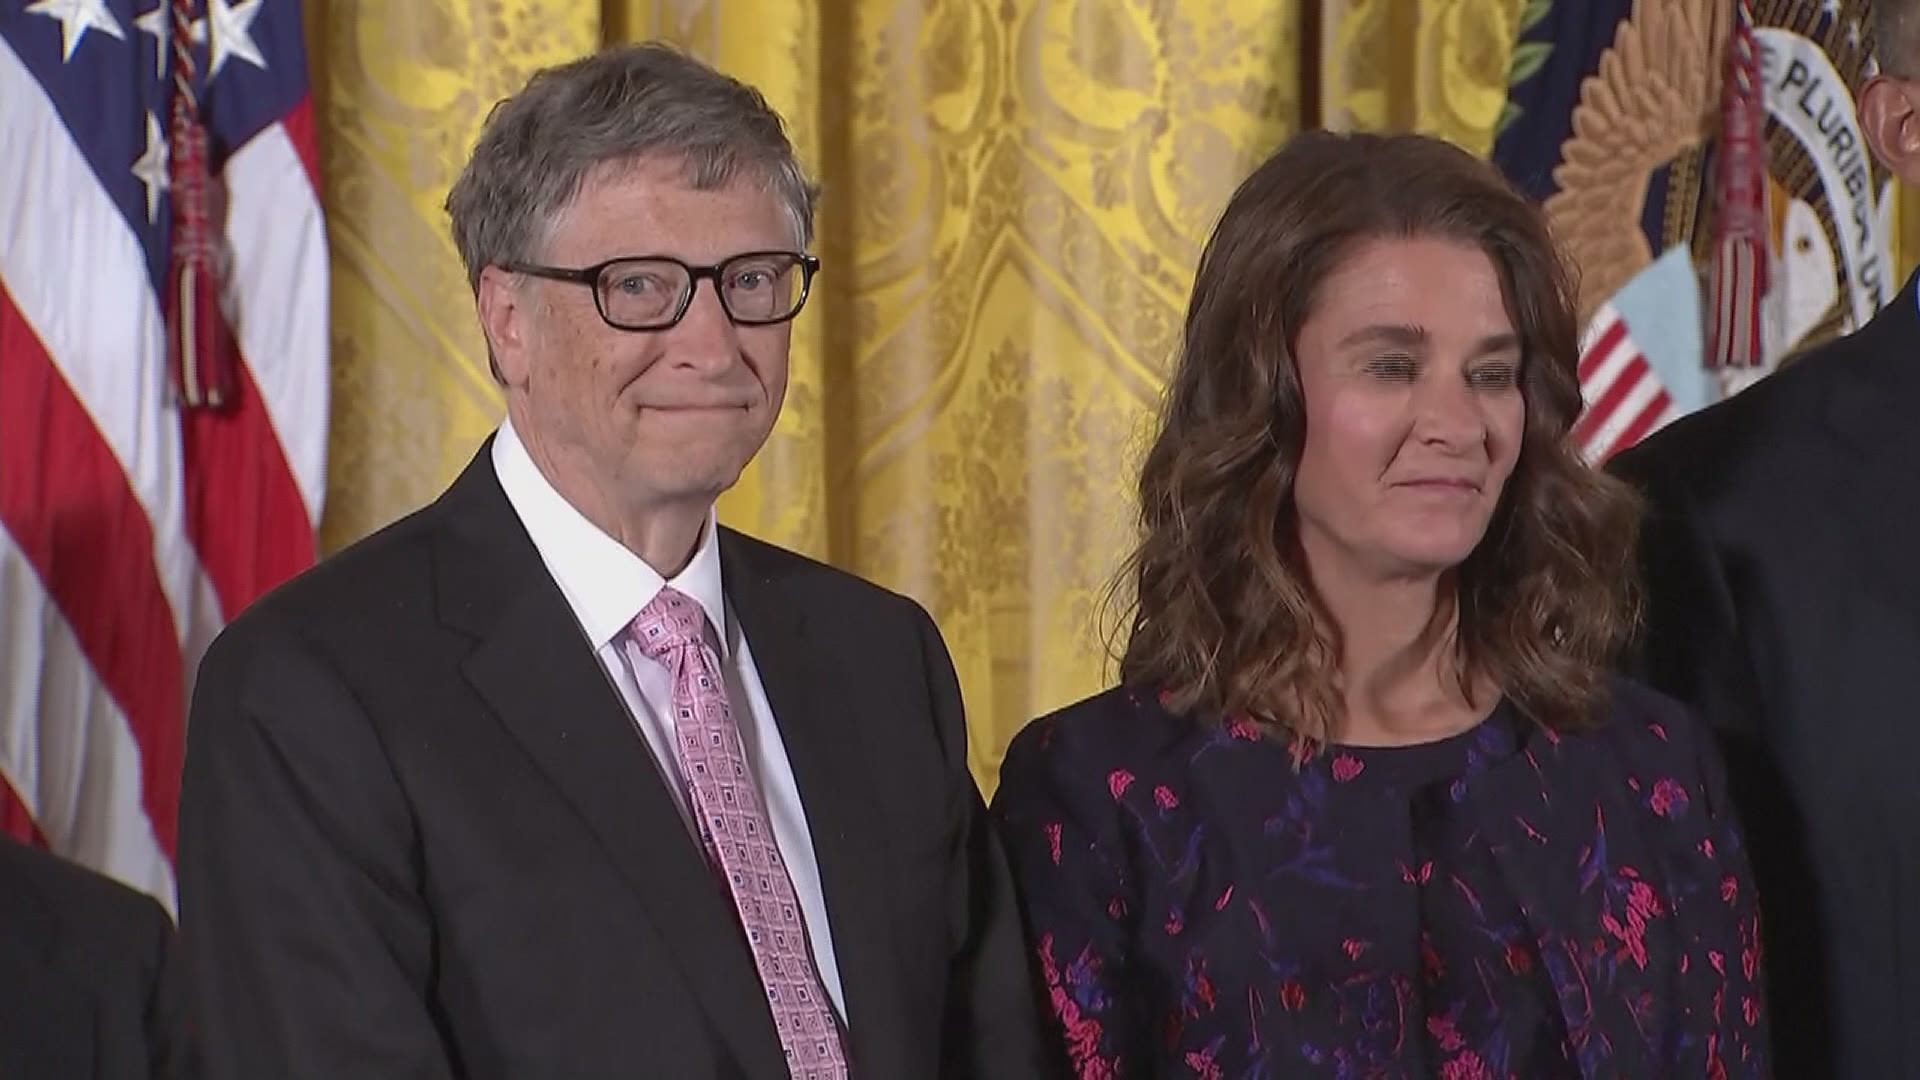 After raising three children and building the Bill & Melinda Gates Foundation, the two are ending their marriage.